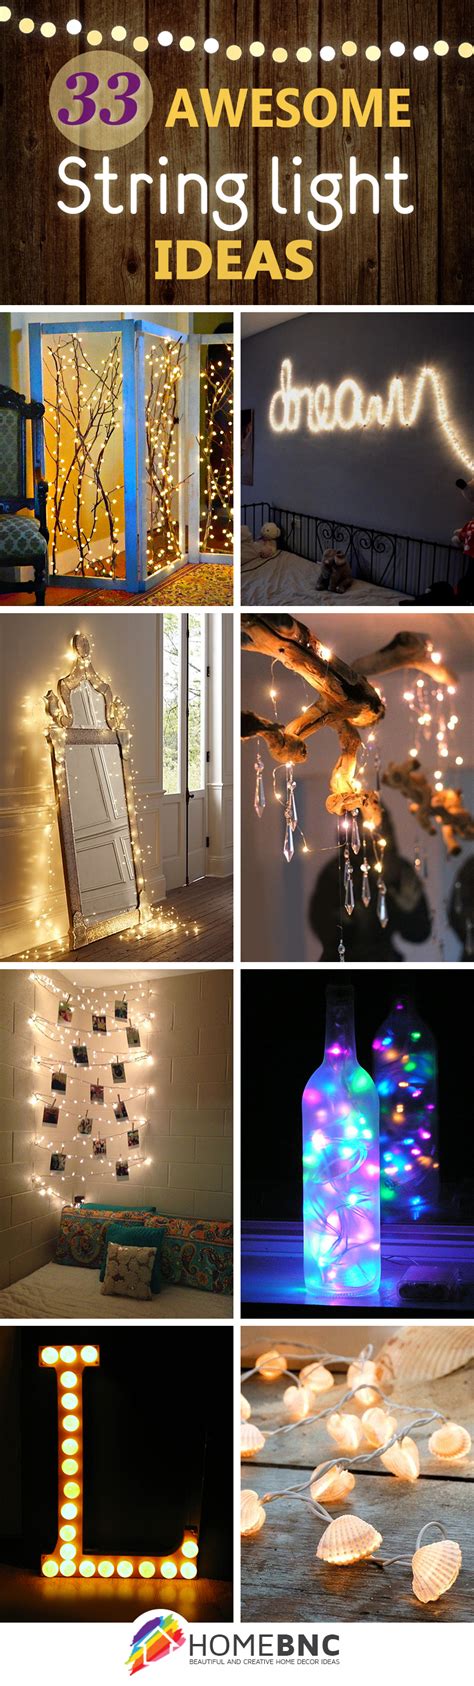 33 Best String Lights Decorating Ideas And Designs For 2017